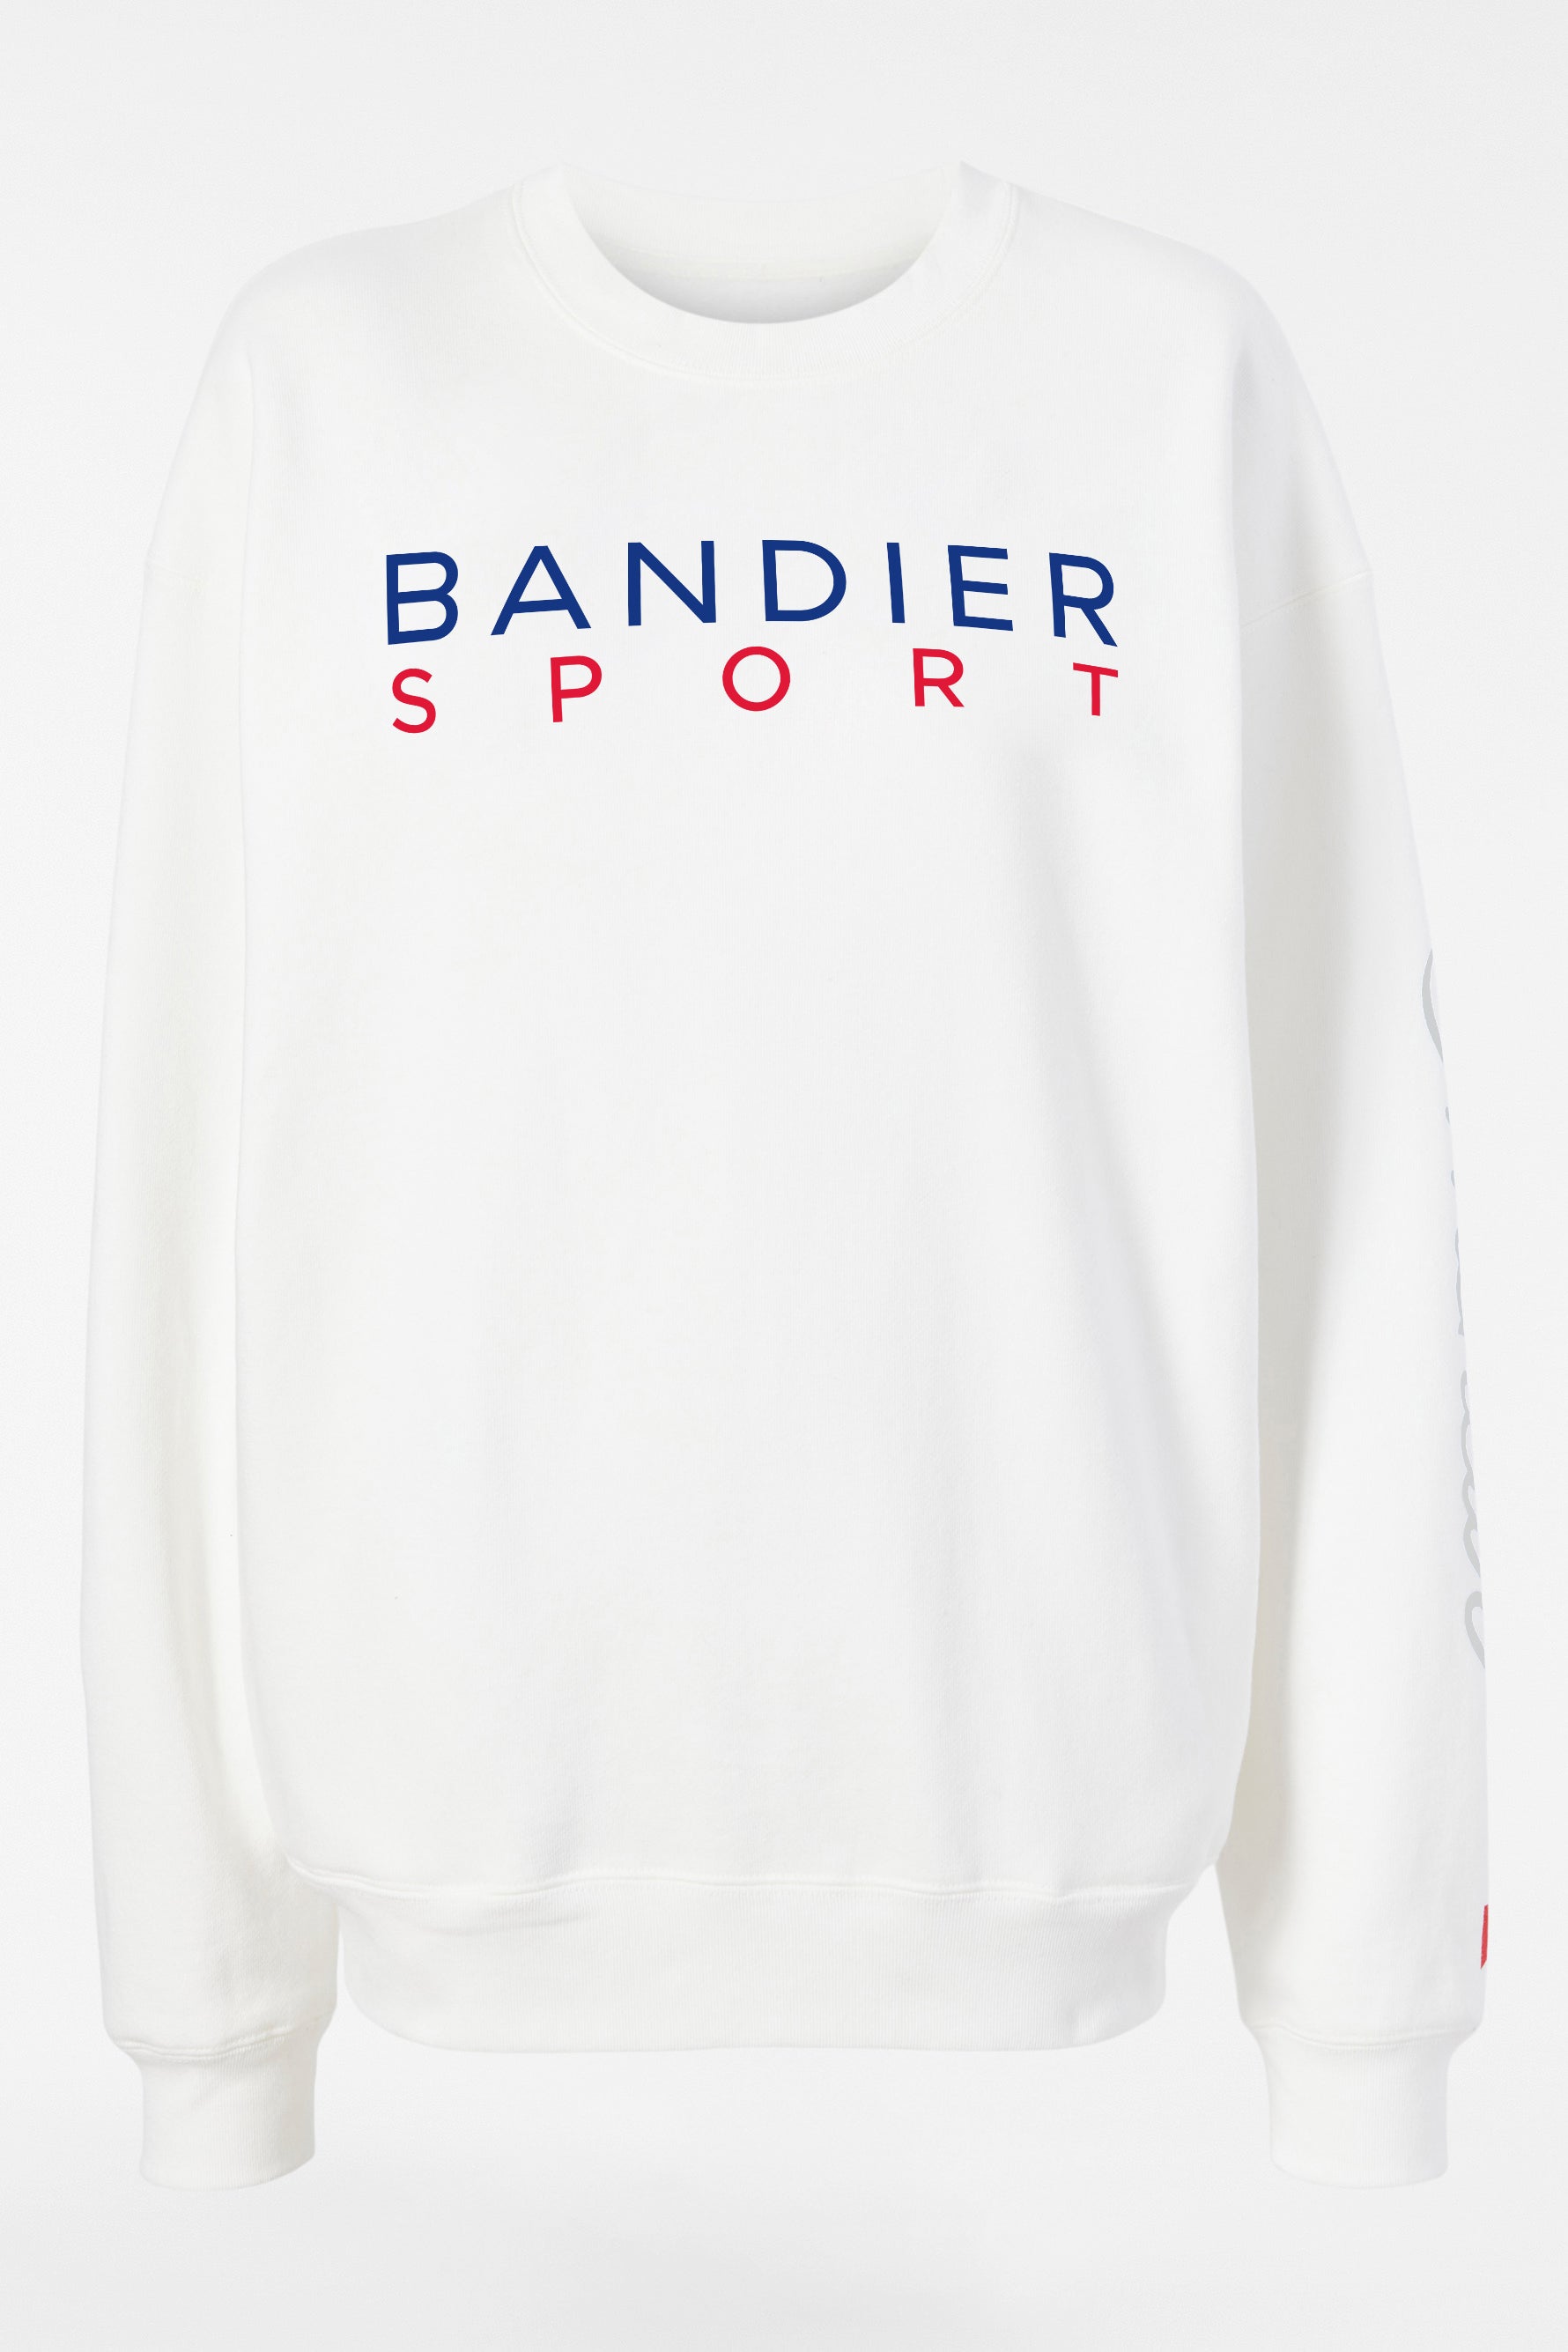 Flat Lay of Bandier x Michelob ULTRA Sweatshirt, front view, "BANDIER SPORT" in blue and red across center chest